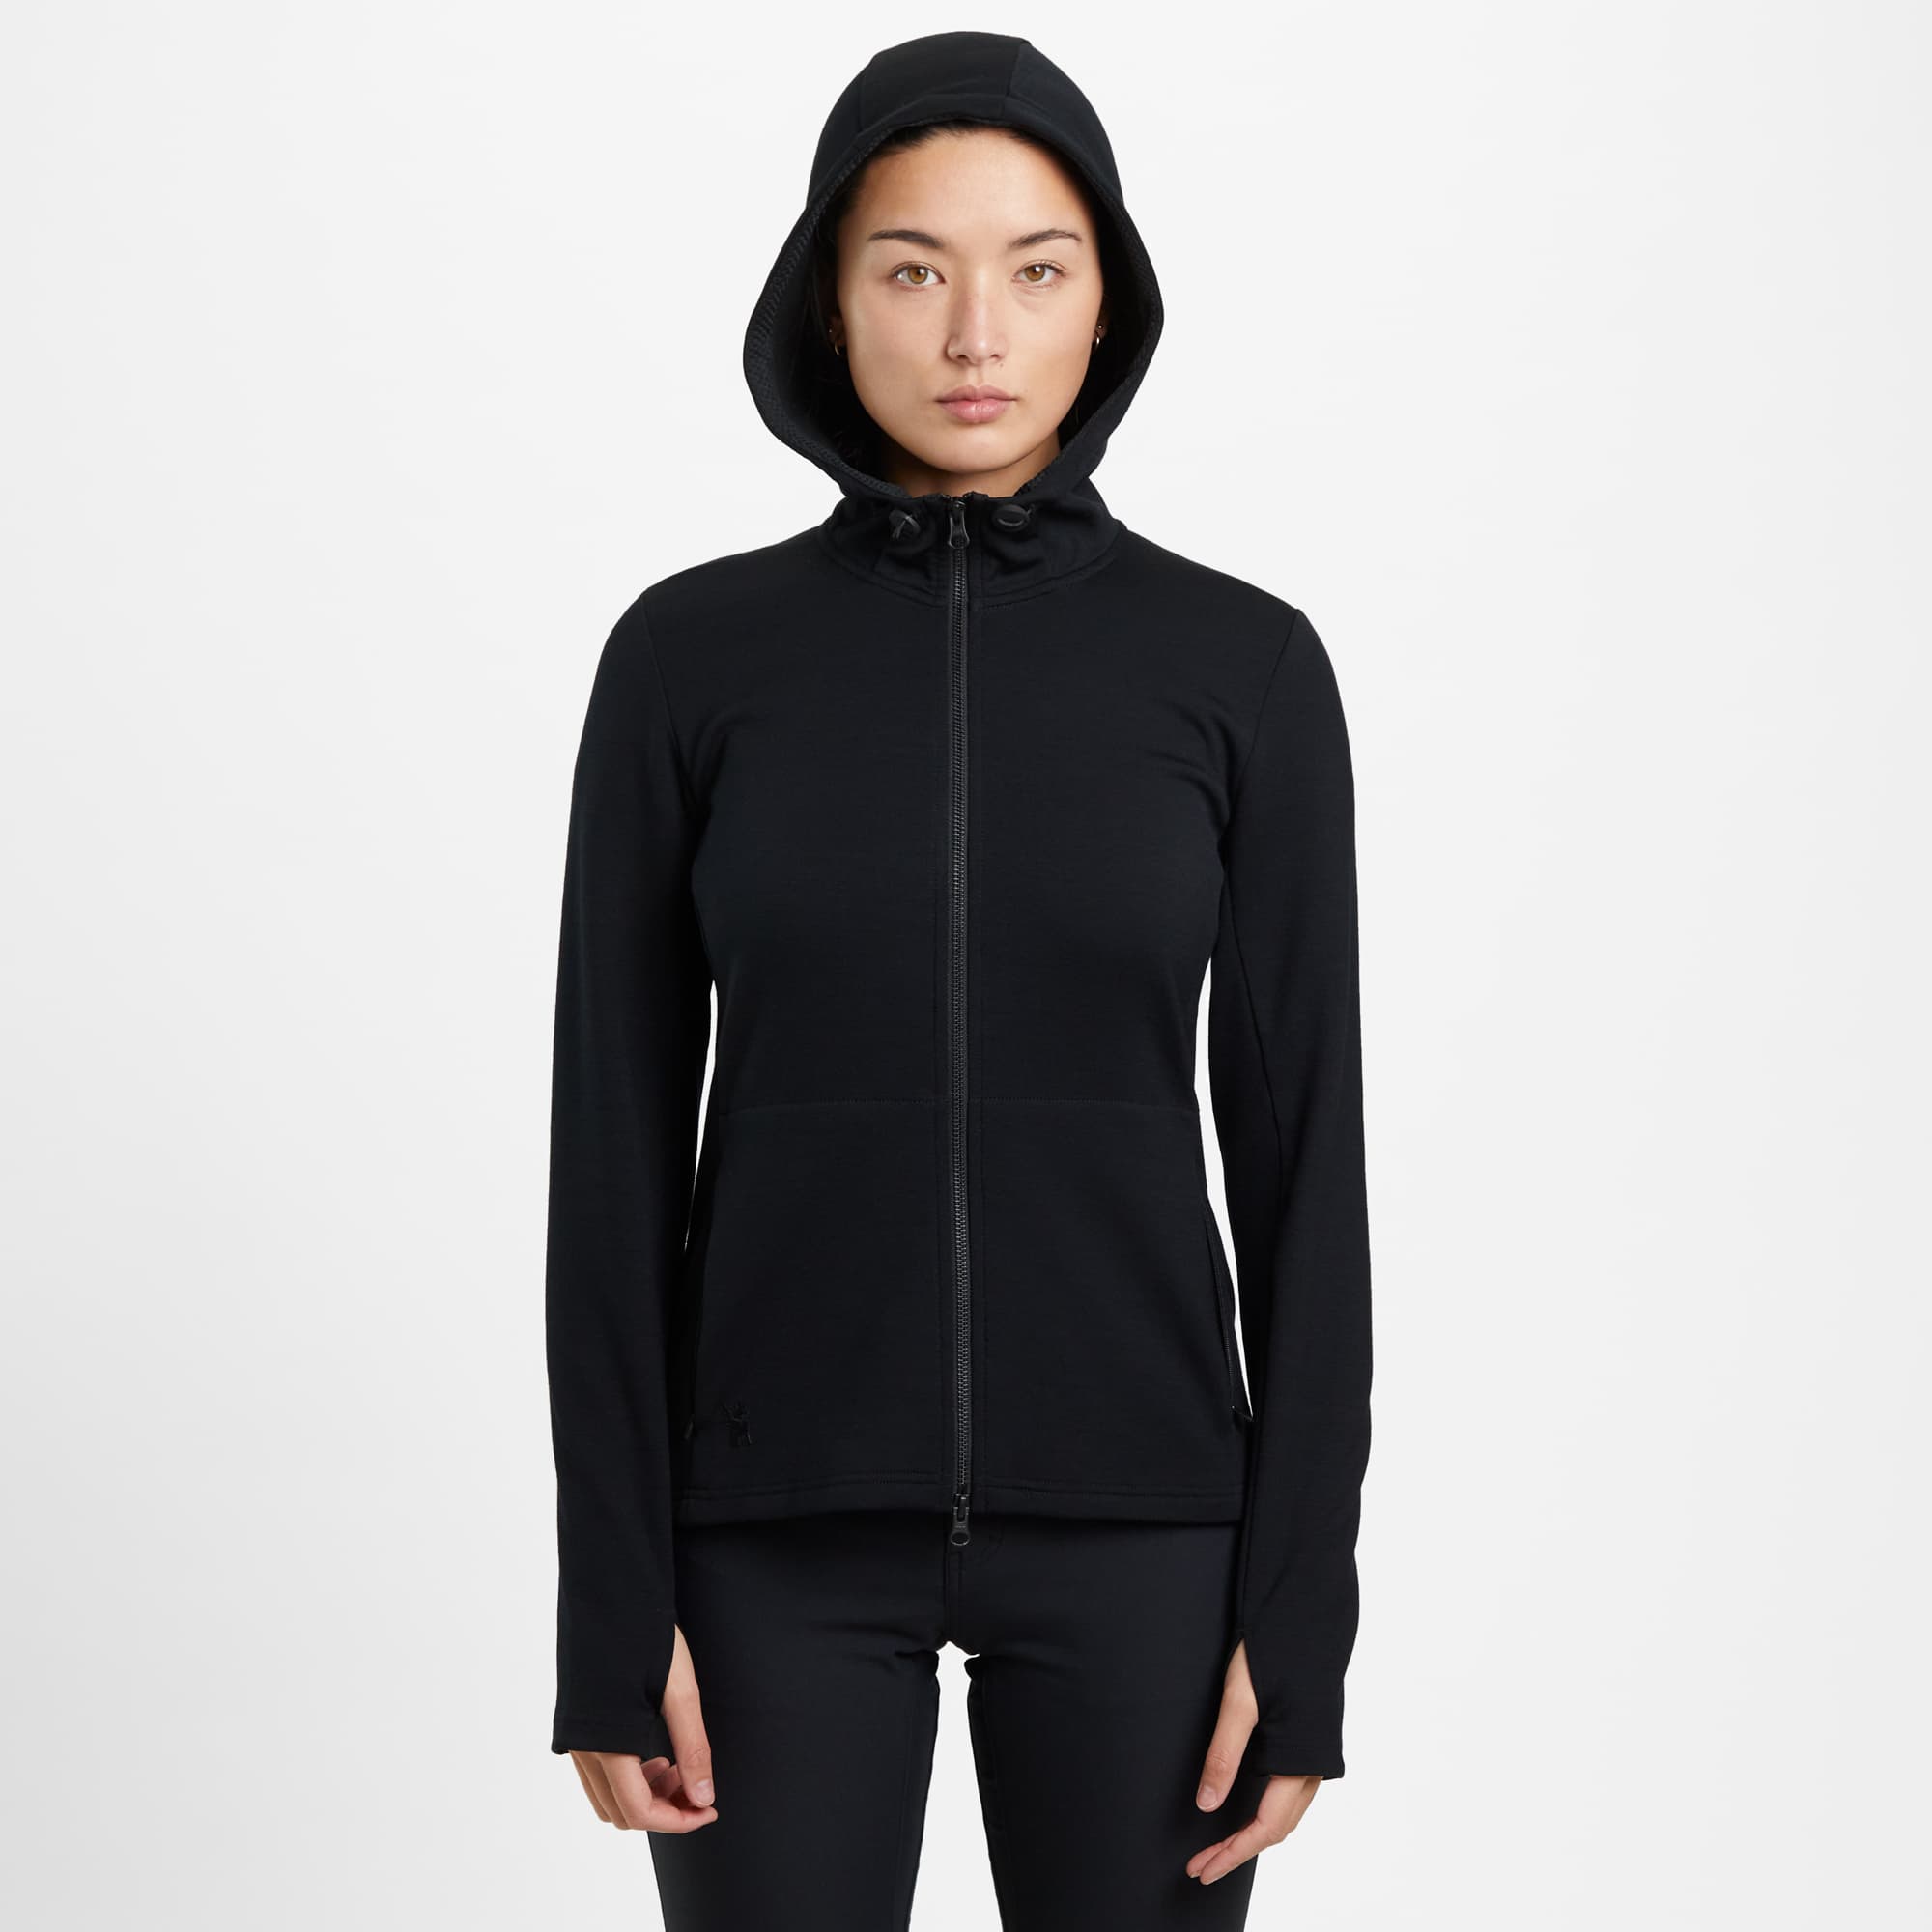 Women's Merino blend performance hoodie in black worn by a woman full on front view